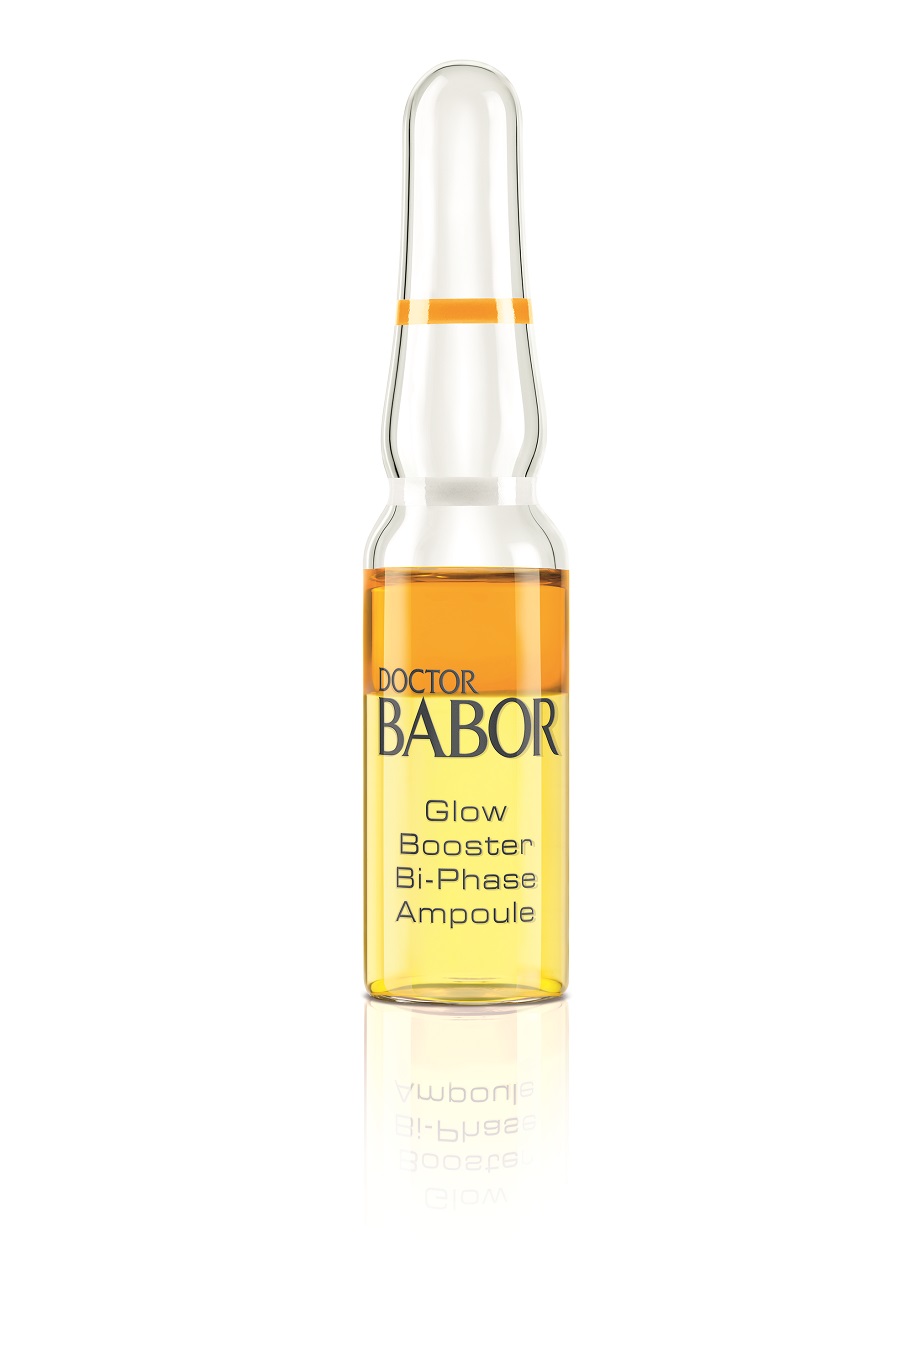 Babor Glow Booster Bi-Phase Ampoule